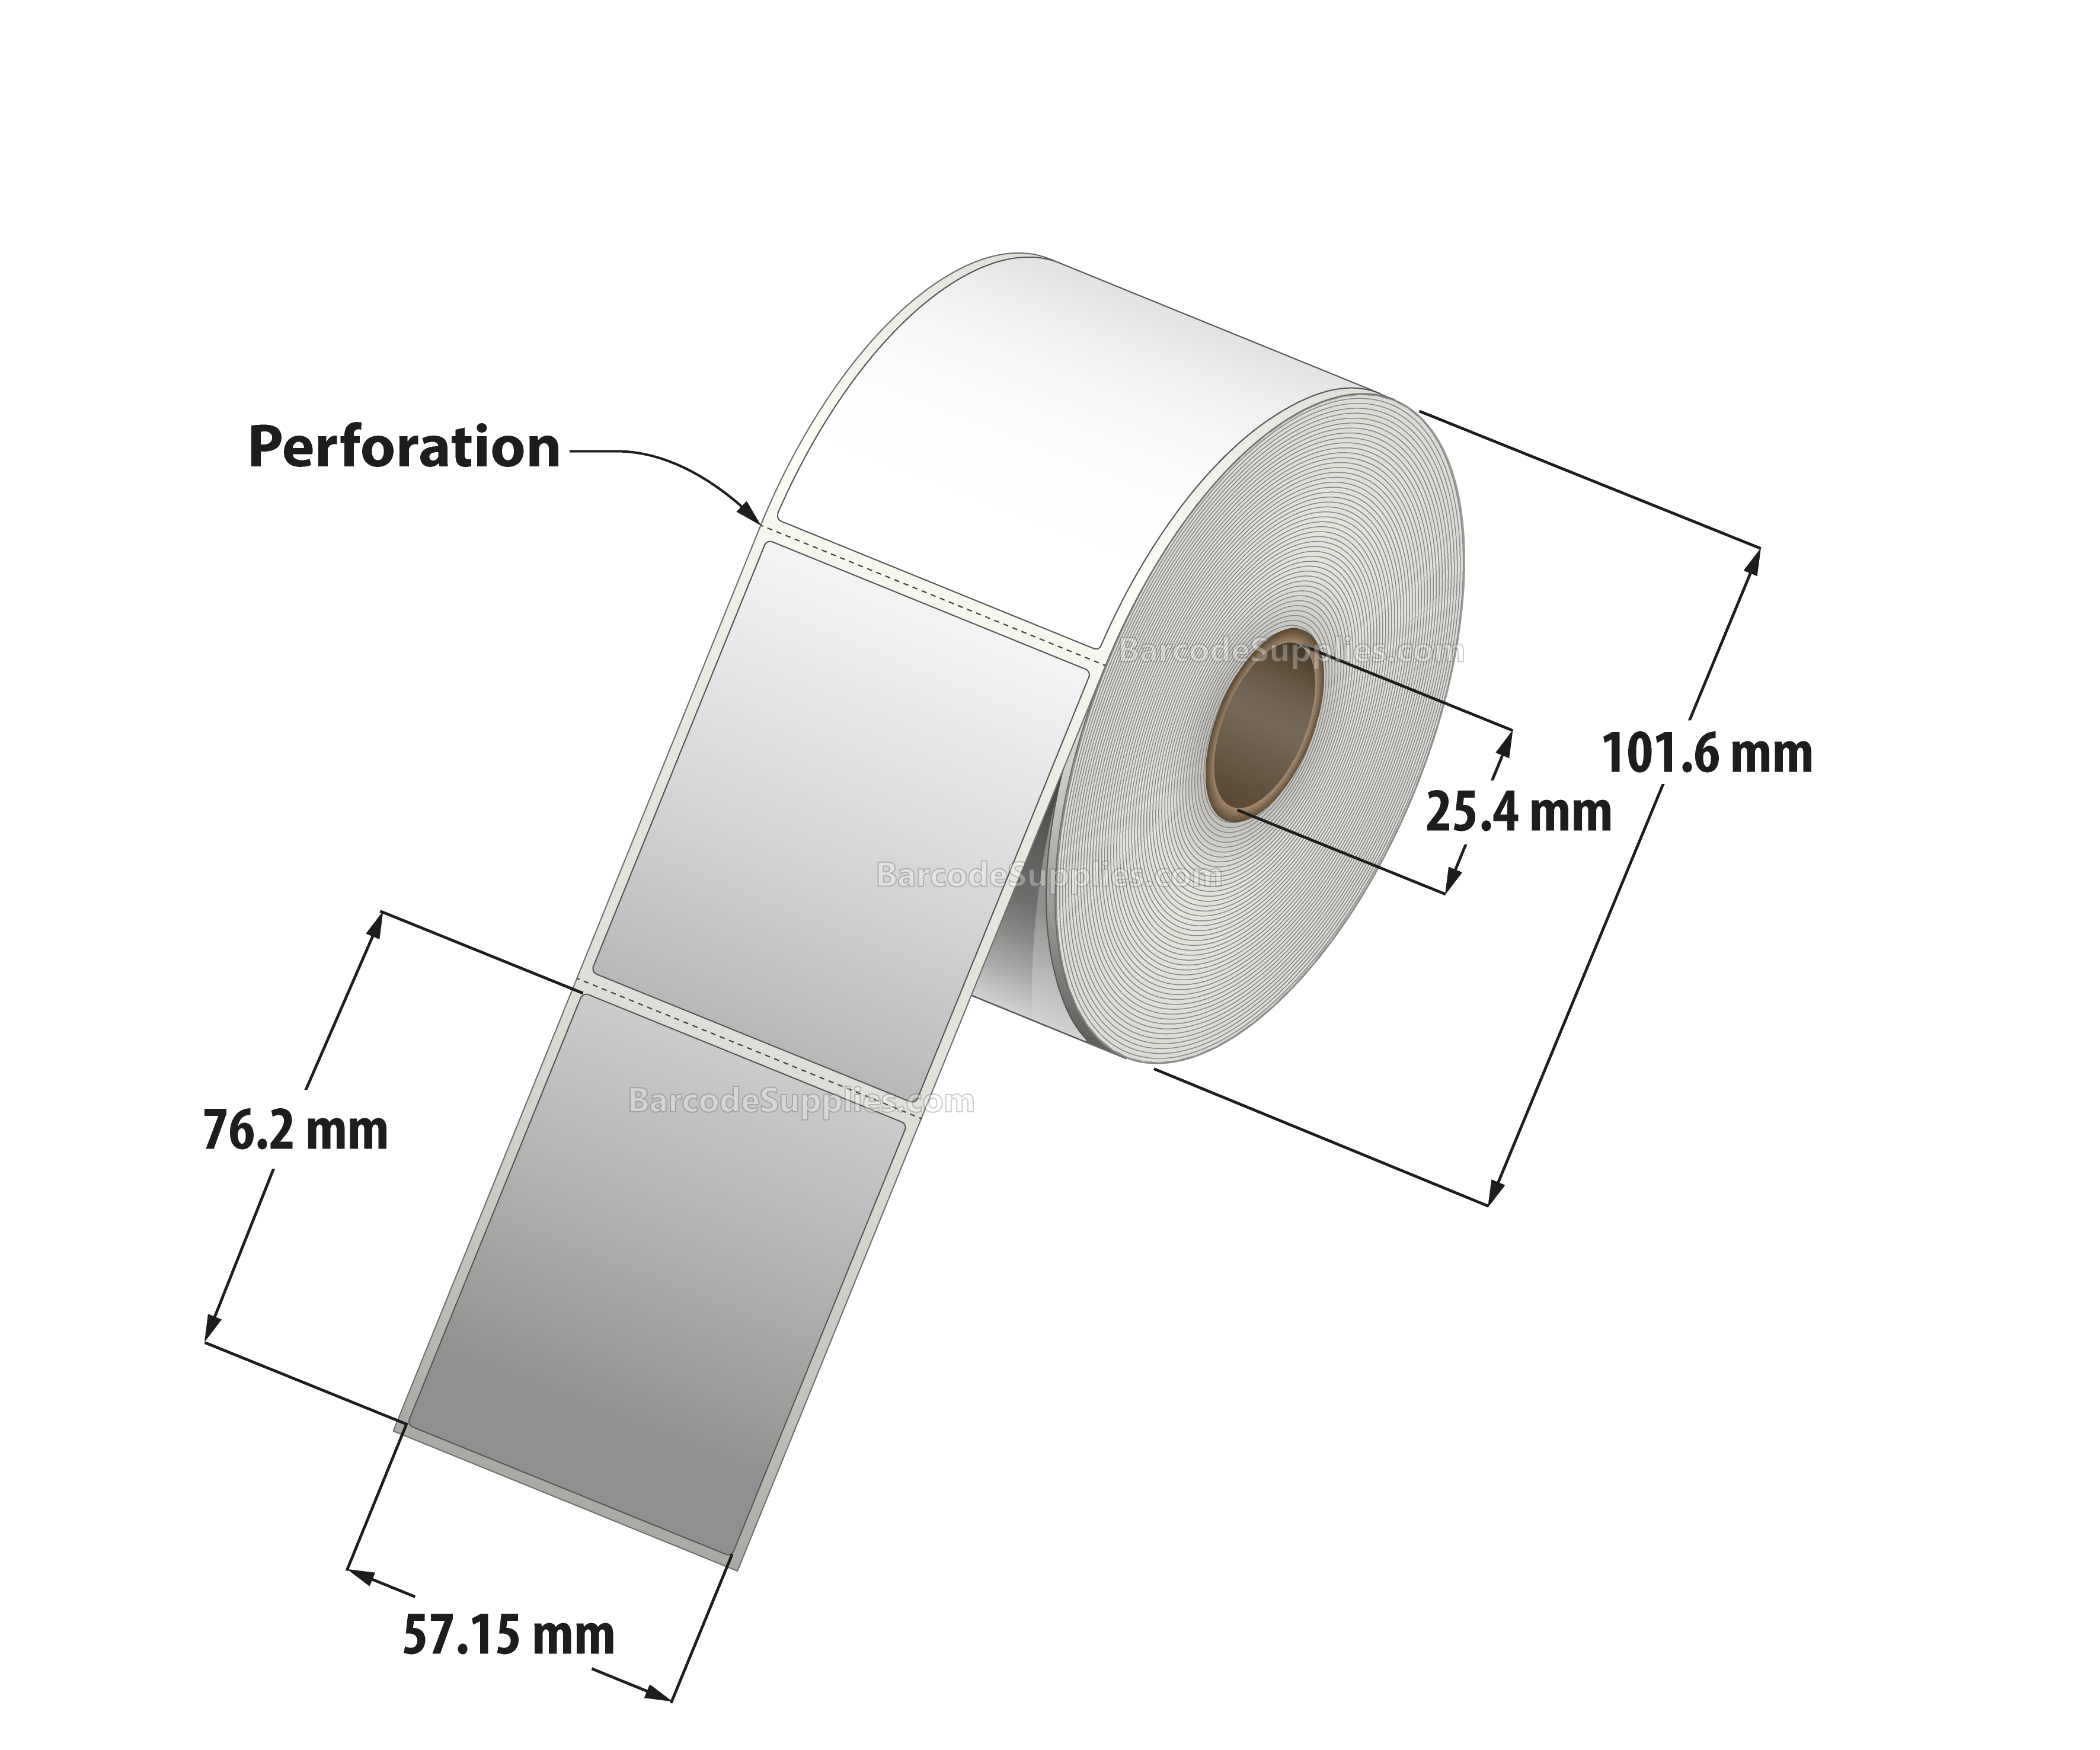 2.25 x 3 Direct Thermal White Labels With Acrylic Adhesive - Perforated - 500 Labels Per Roll - Carton Of 12 Rolls - 6000 Labels Total - MPN: RD-225-3-500-1 - BarcodeSource, Inc.